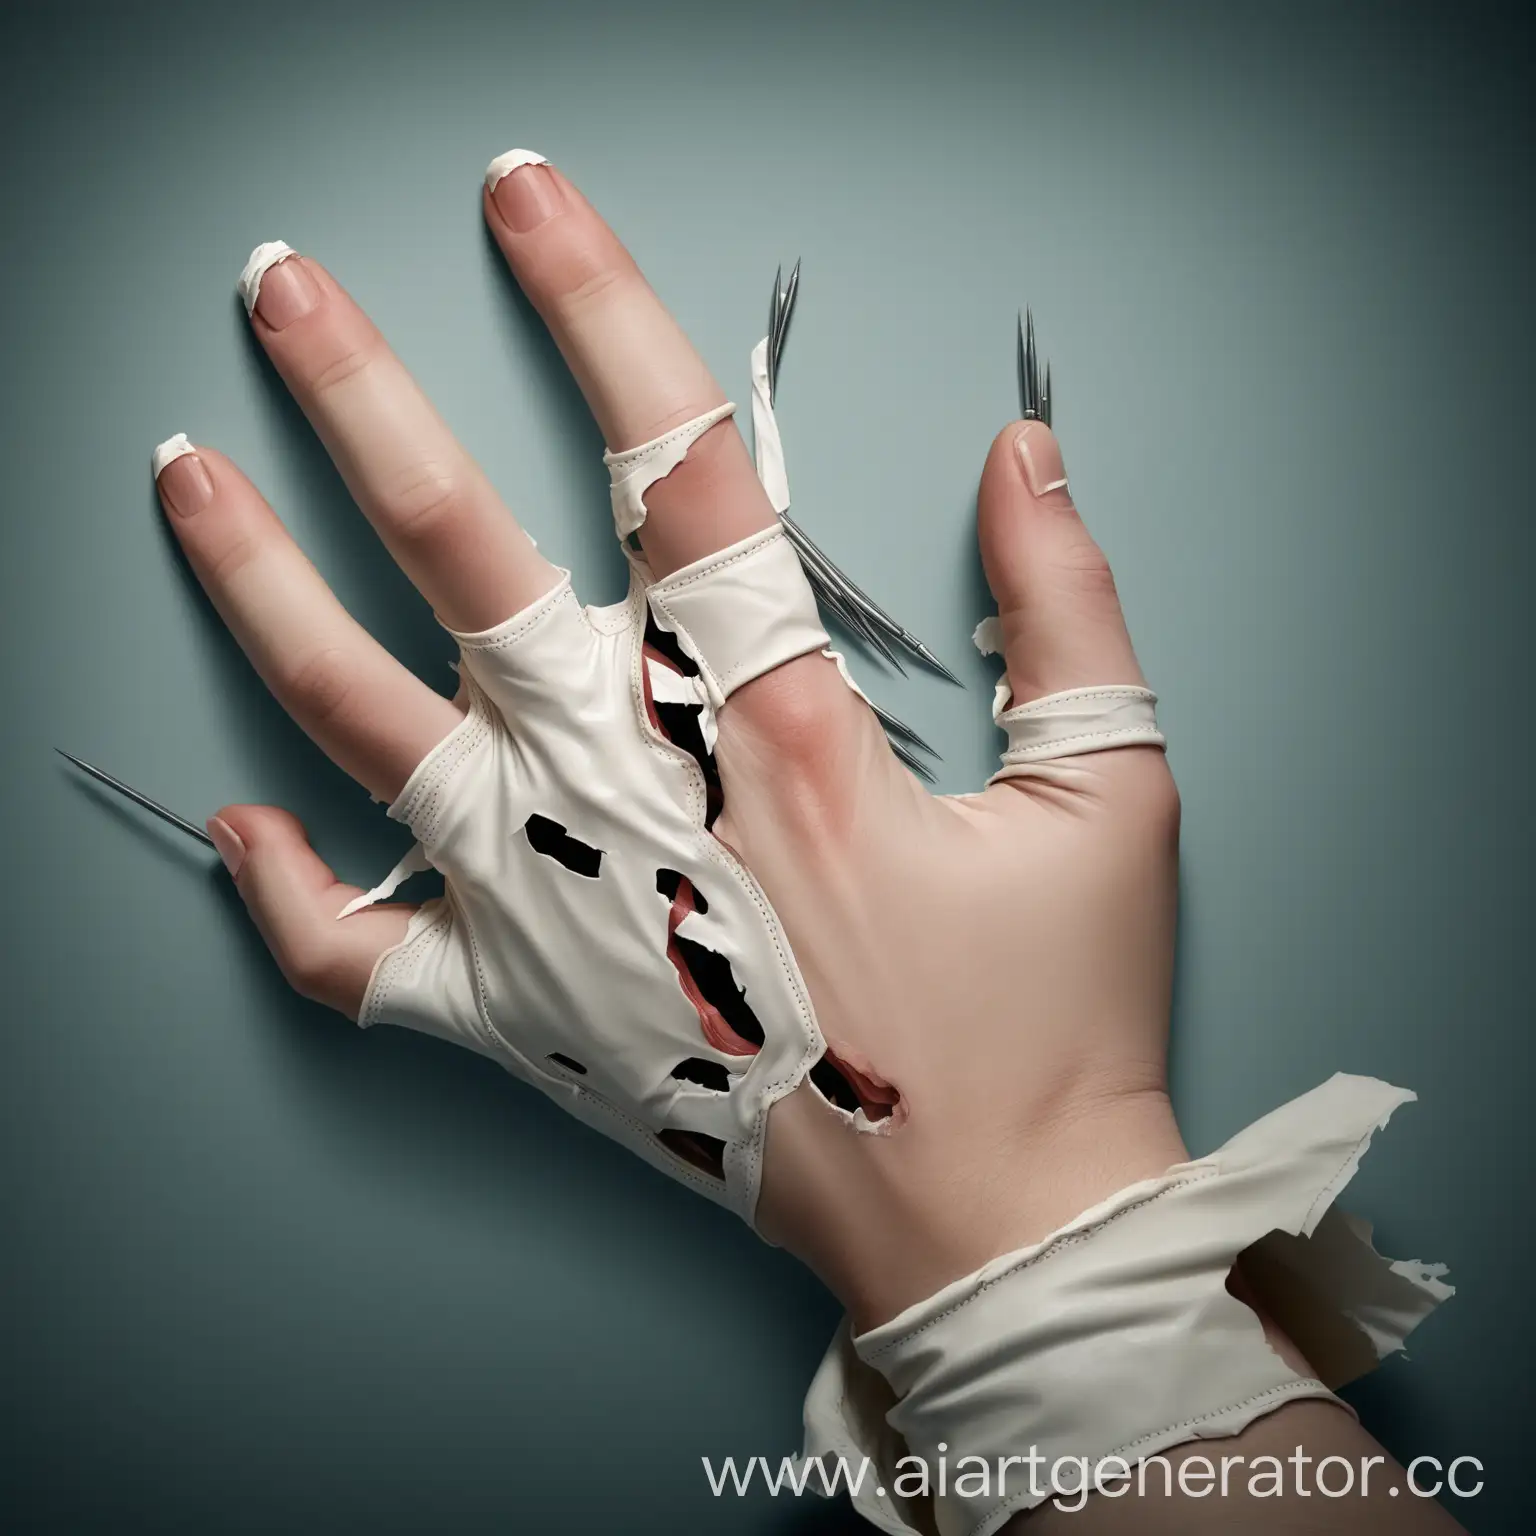 Medical-Glove-Torn-by-Nails